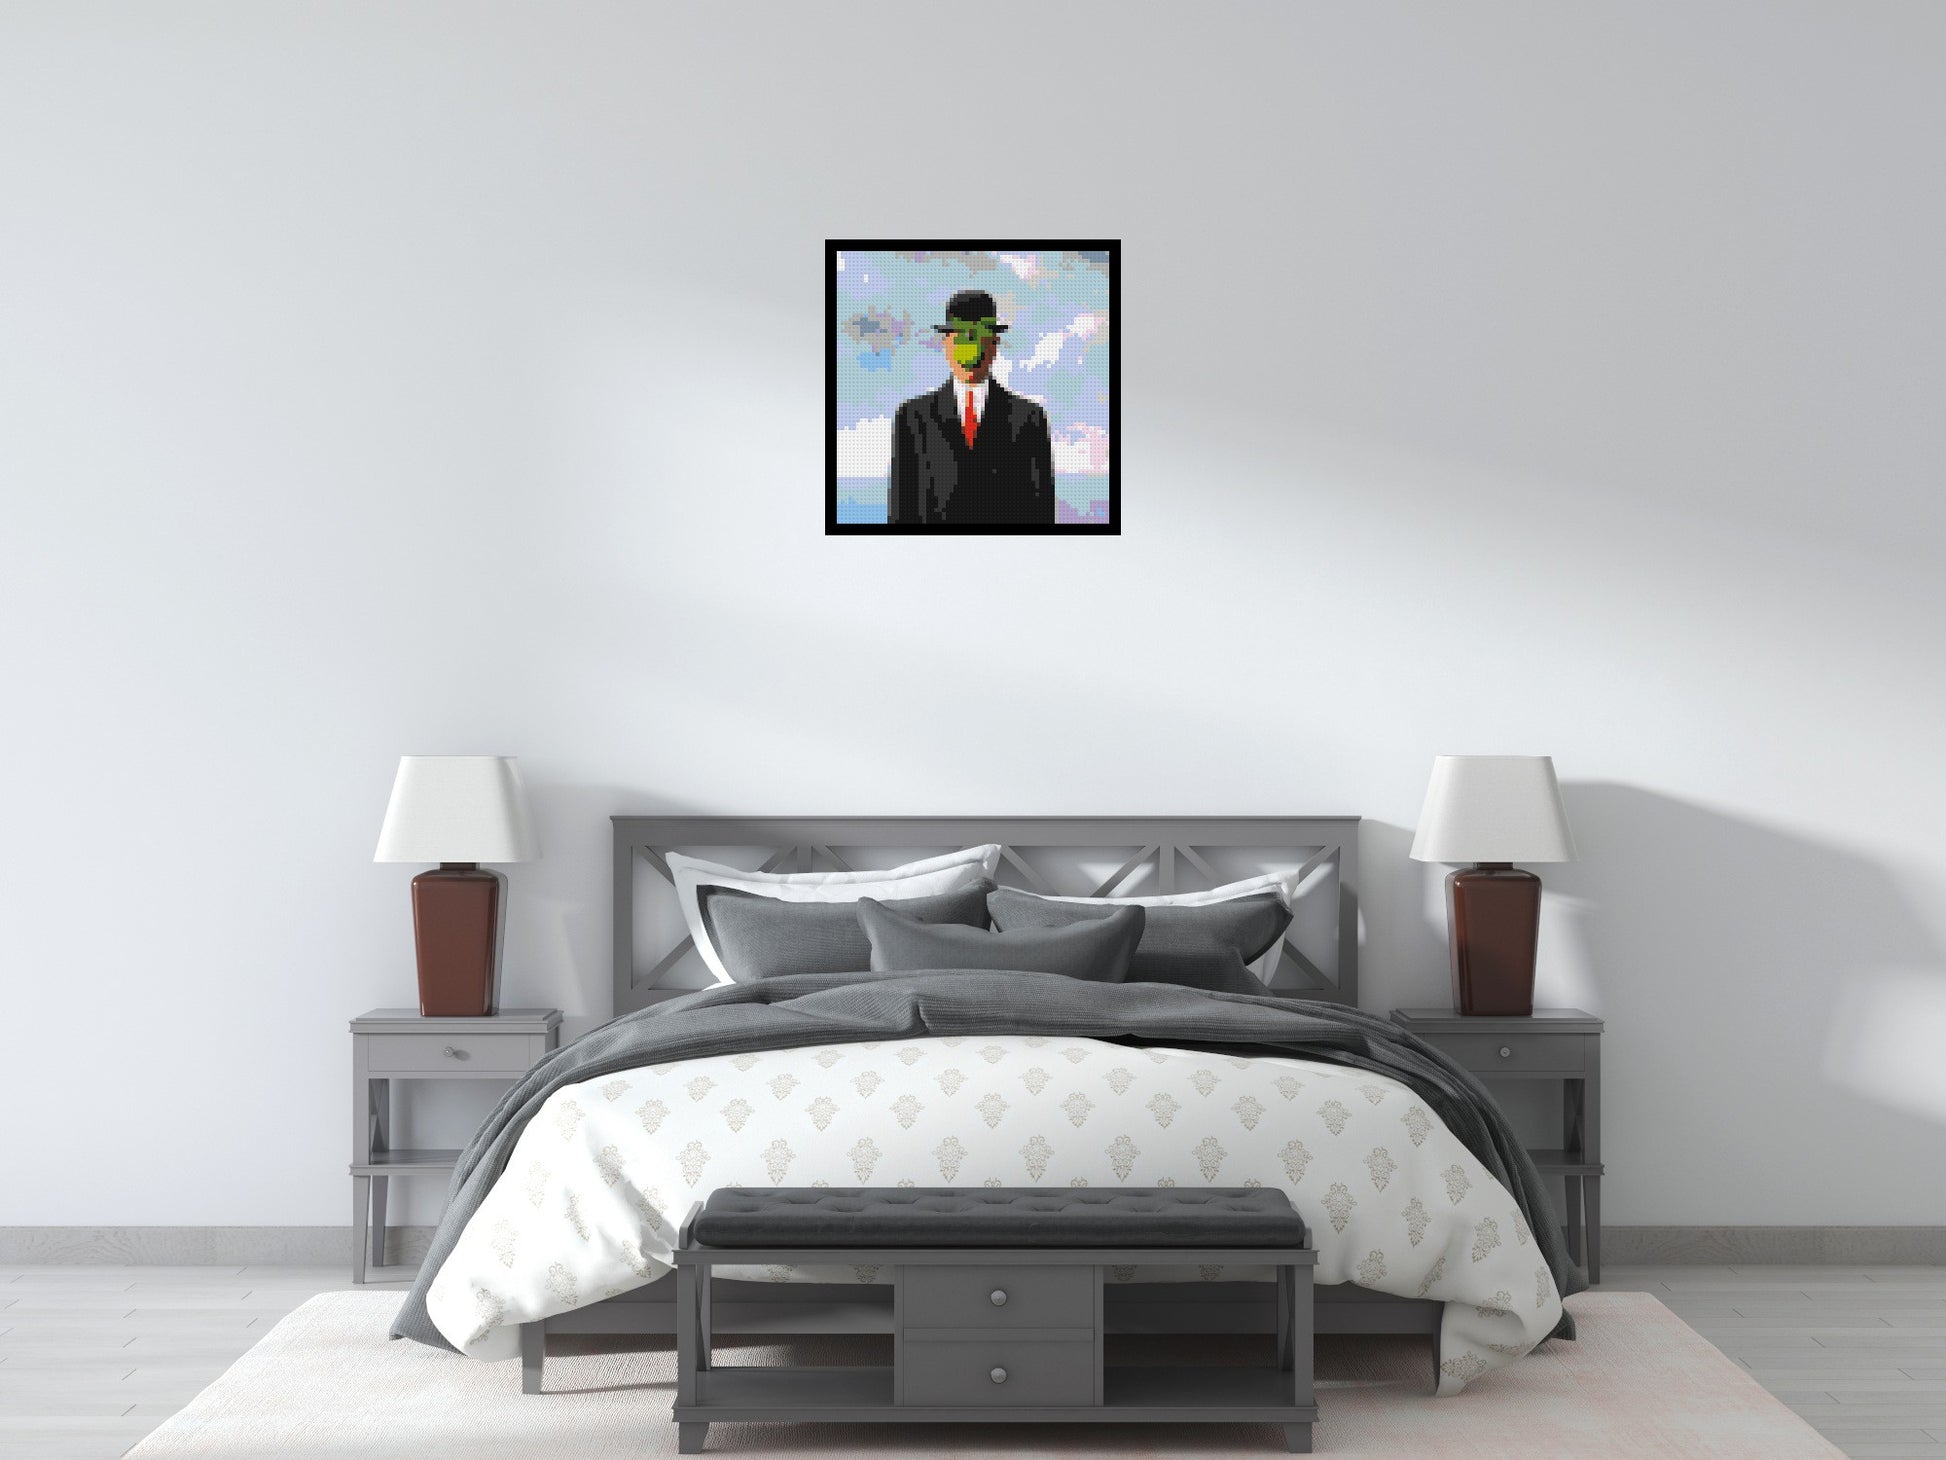 The Son of Man by René Magritte - Brick Art Mosaic Kit 3x3 scene with frame